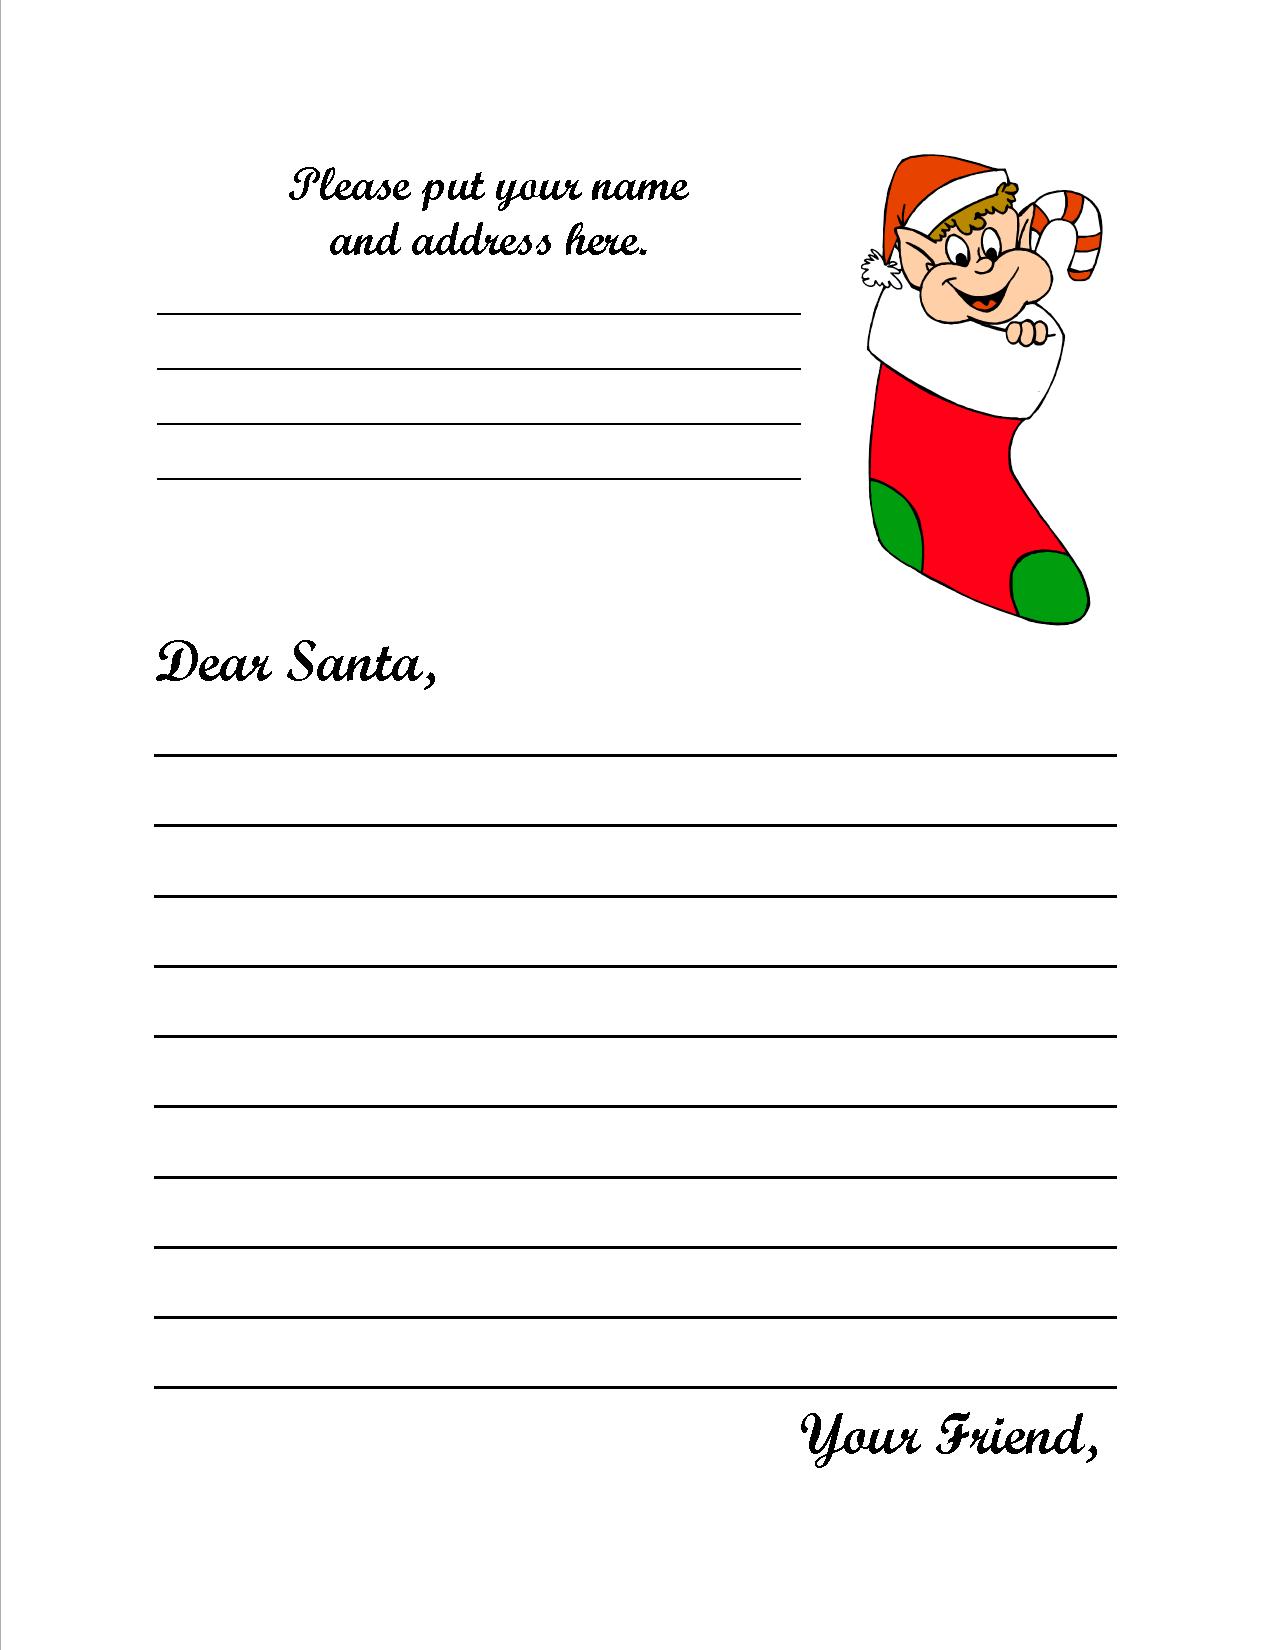 8-best-images-of-santa-claus-letter-template-printable-santa-claus-santa-claus-christmas-list